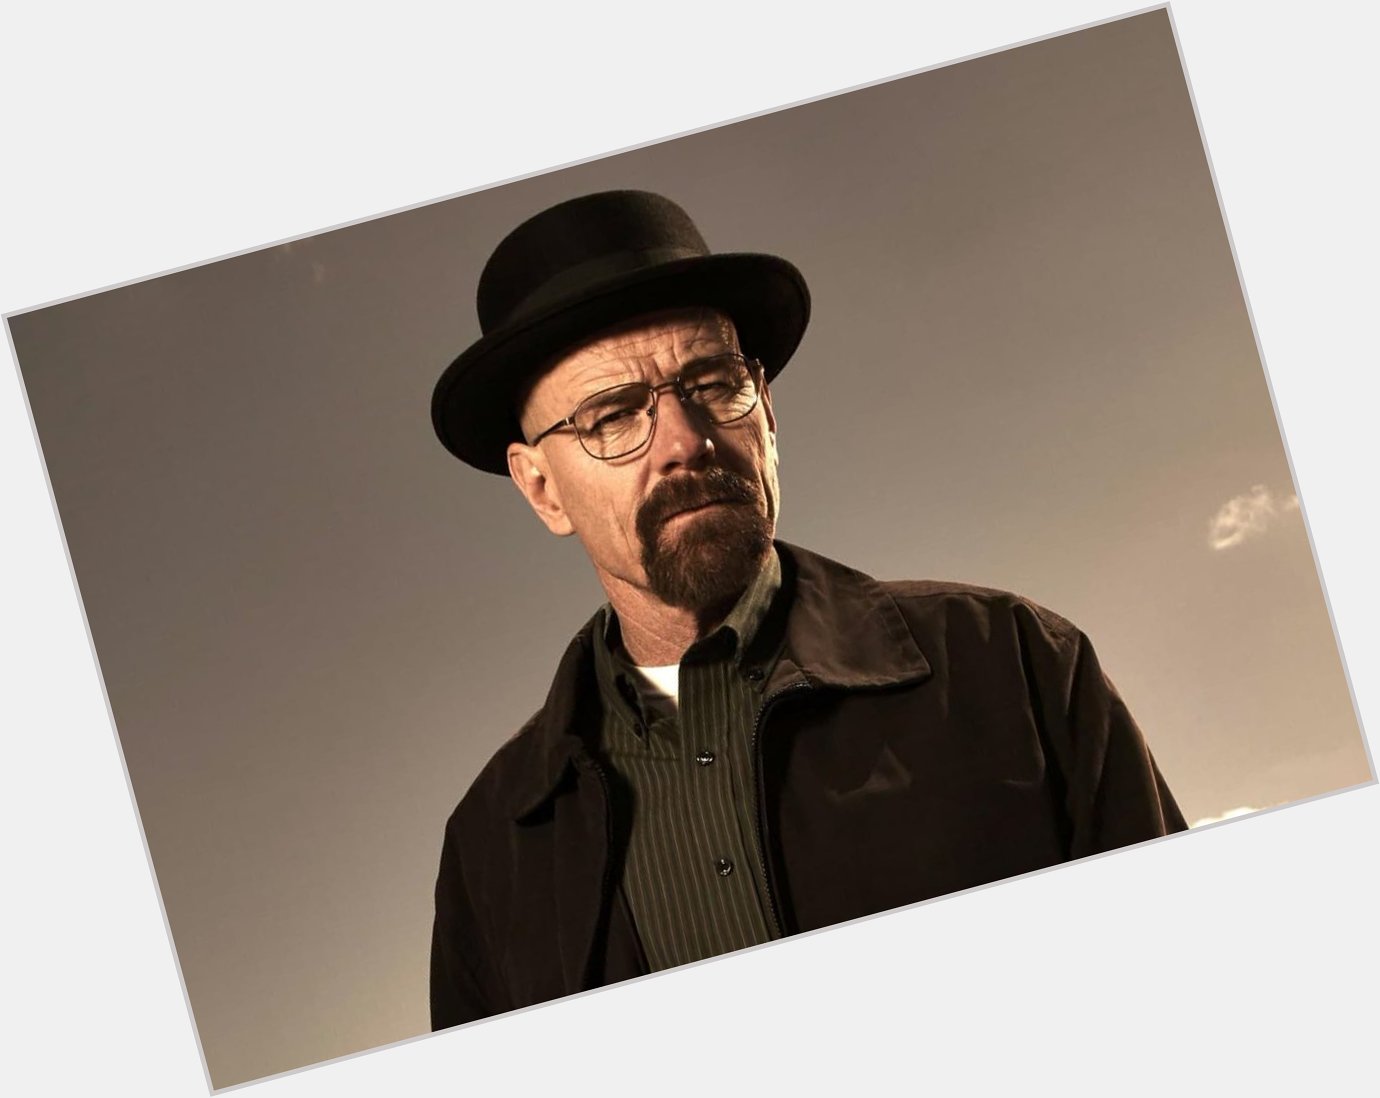 Say his name...also a Happy Birthday as Bryan Cranston turns 66 today  